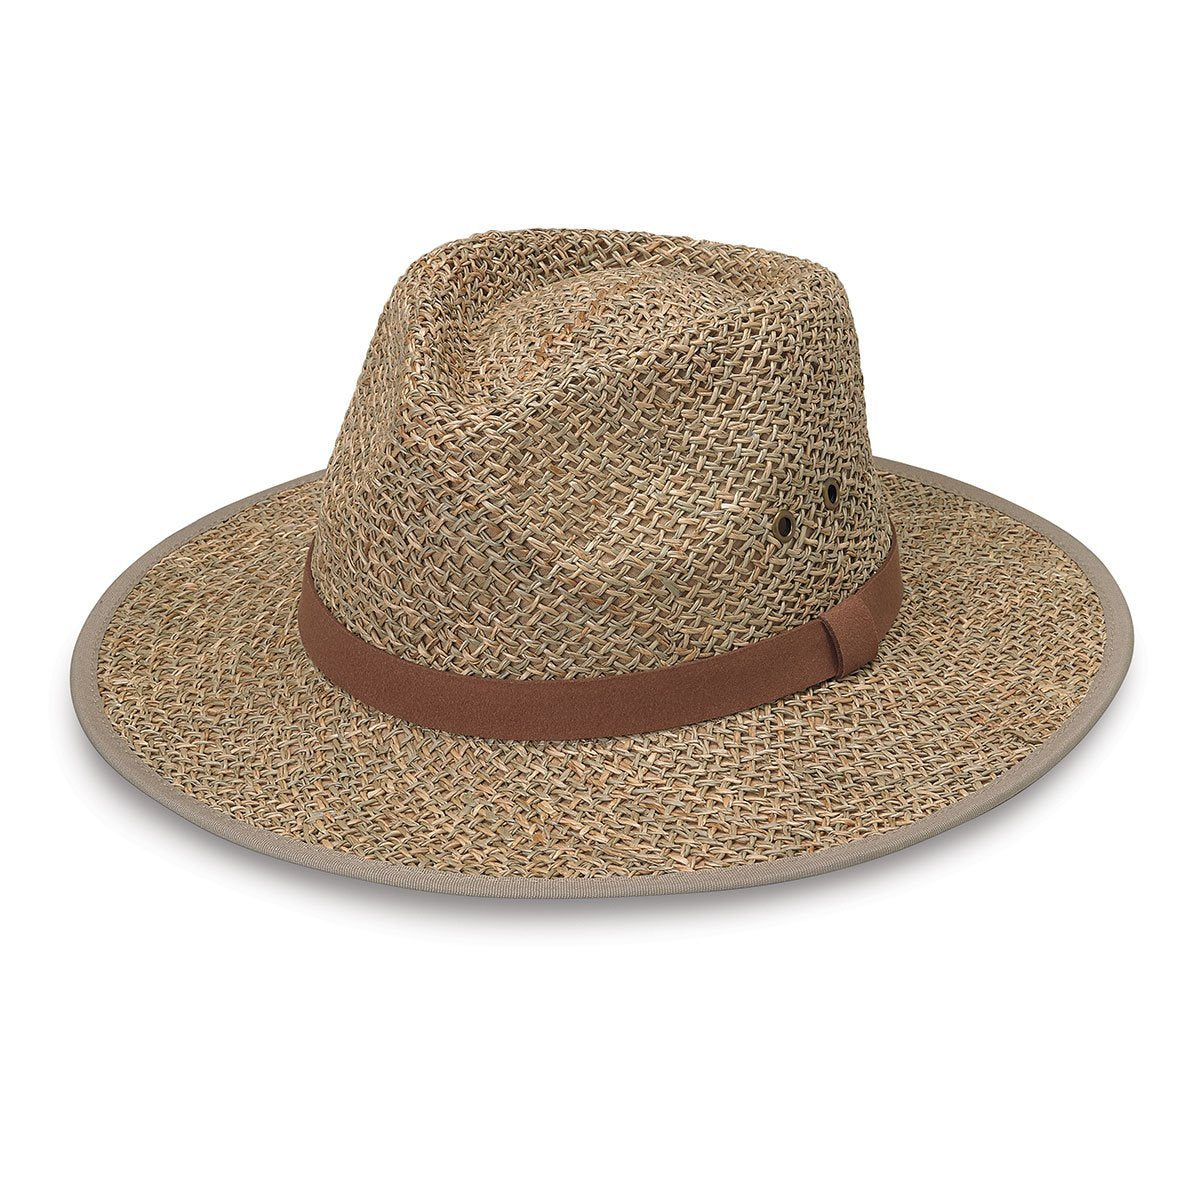 Featuring Charleston UPF Fedora Style Sun Hat with Chinstrap in Natural from Wallaroo